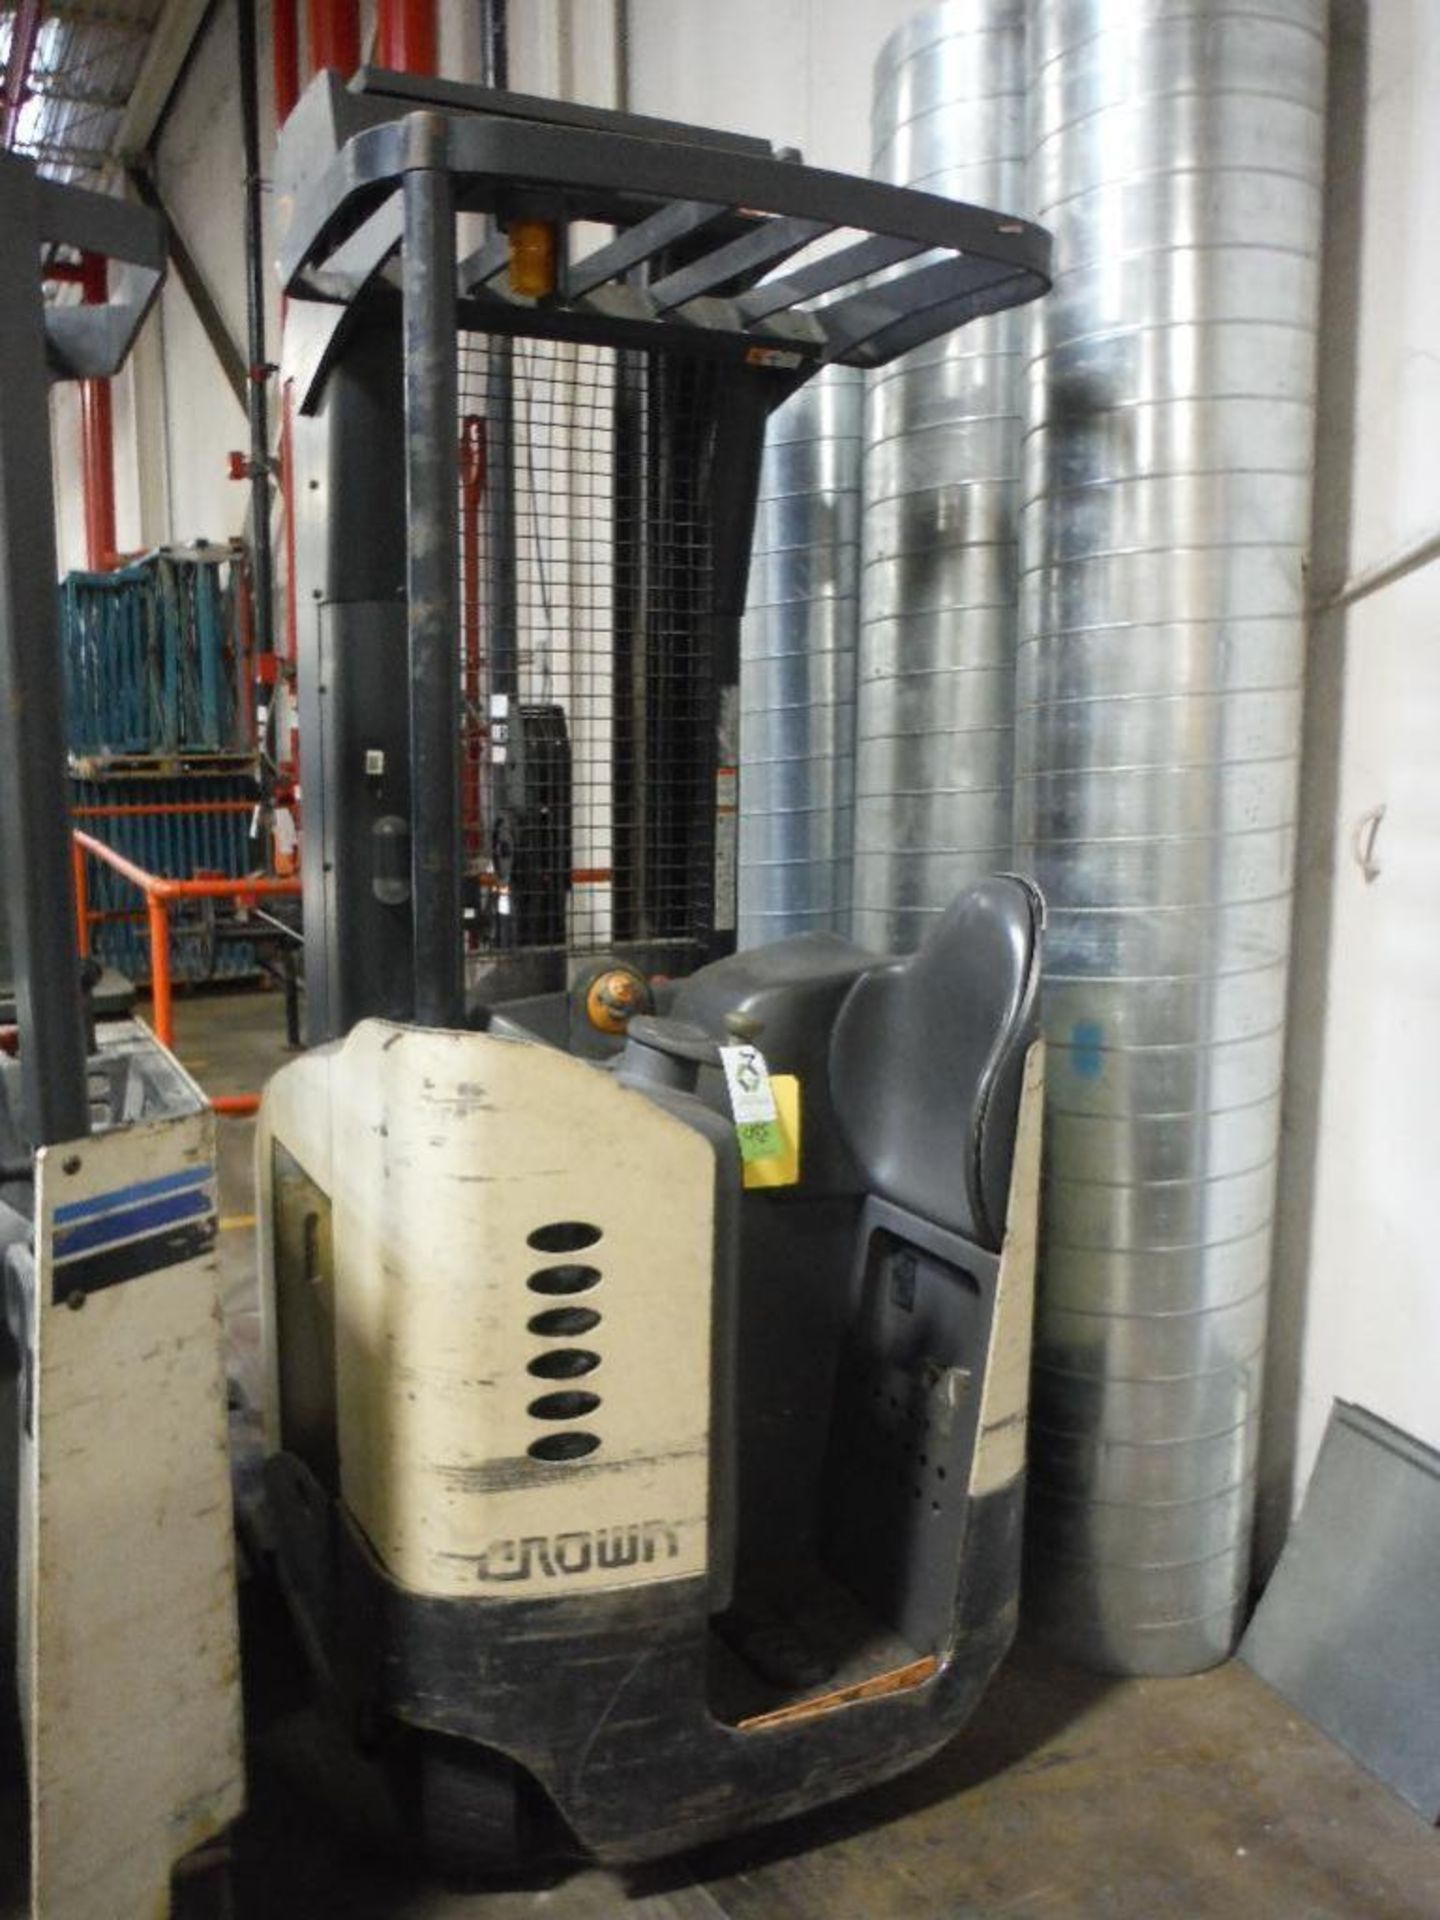 Crown 36 volt stand up fork lift, Model RD5220-30, SN 1A287137, 107 in. mast height, double mast, 42